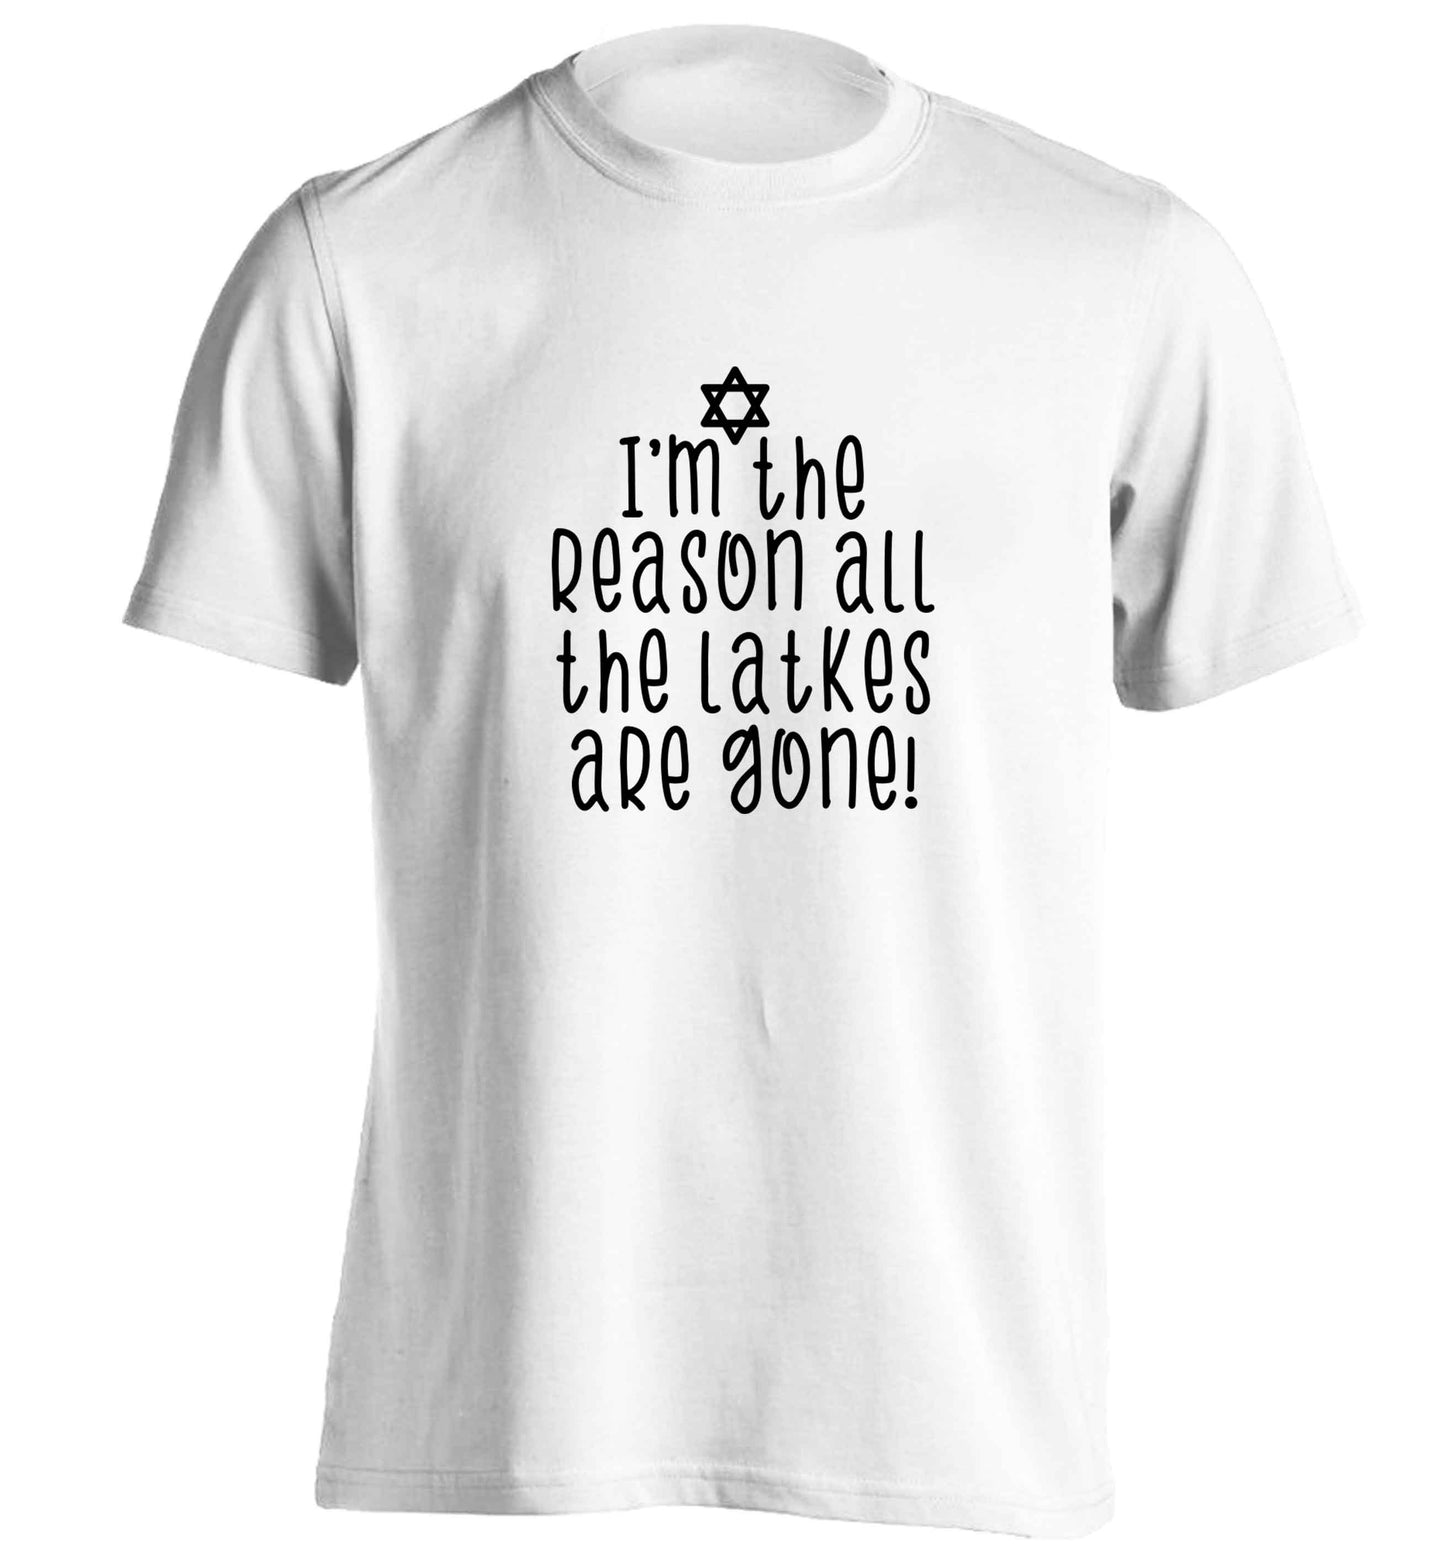 I'm the reason all the latkes are gone adults unisex white Tshirt 2XL